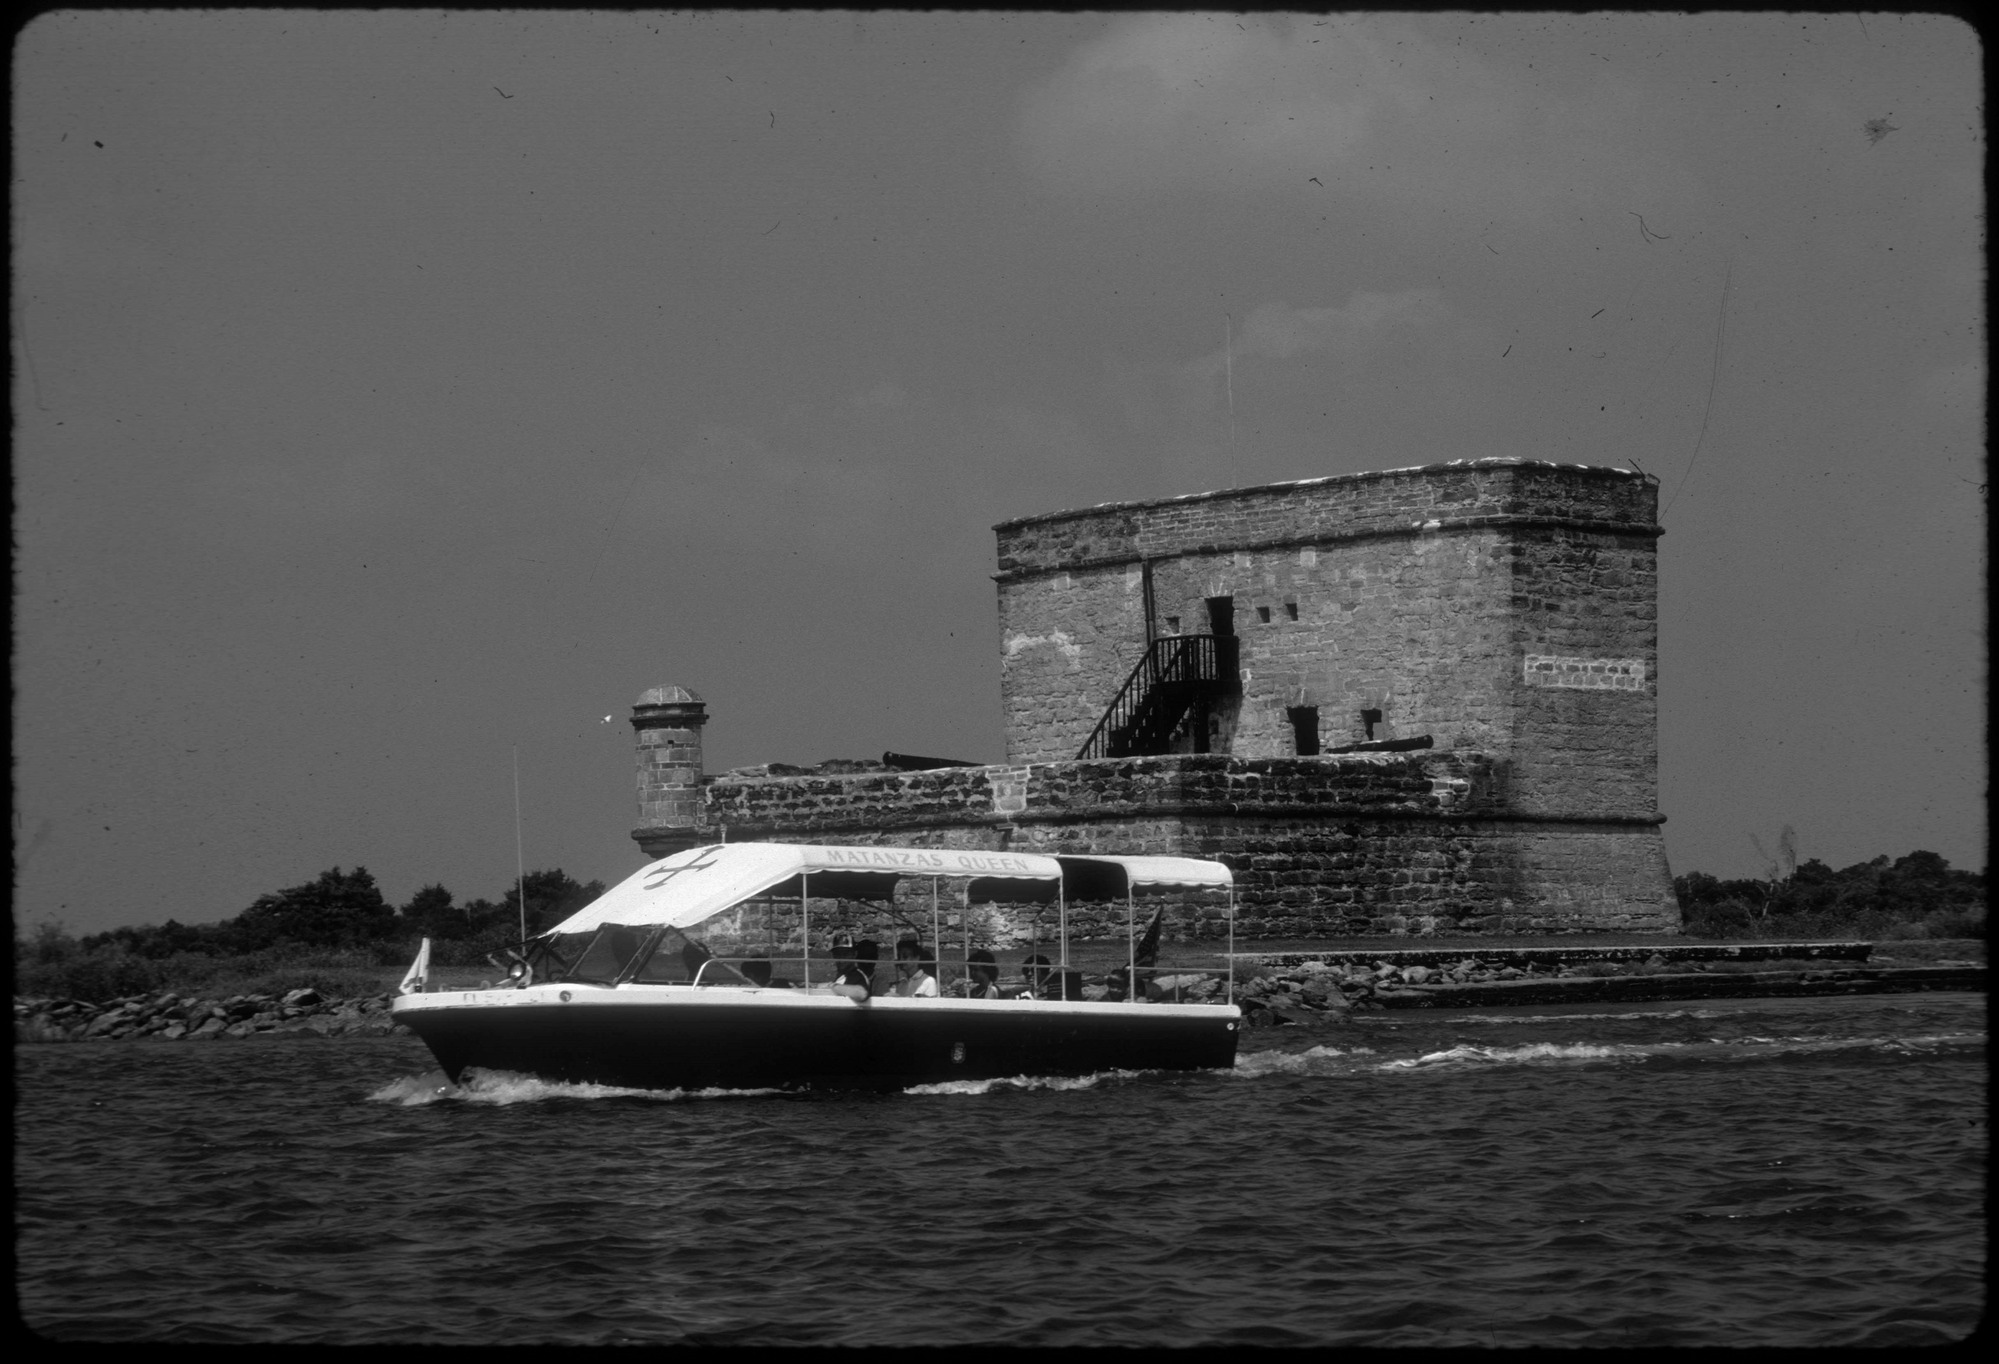 Dark v-hulled boat with white canopy. Fort in the background.